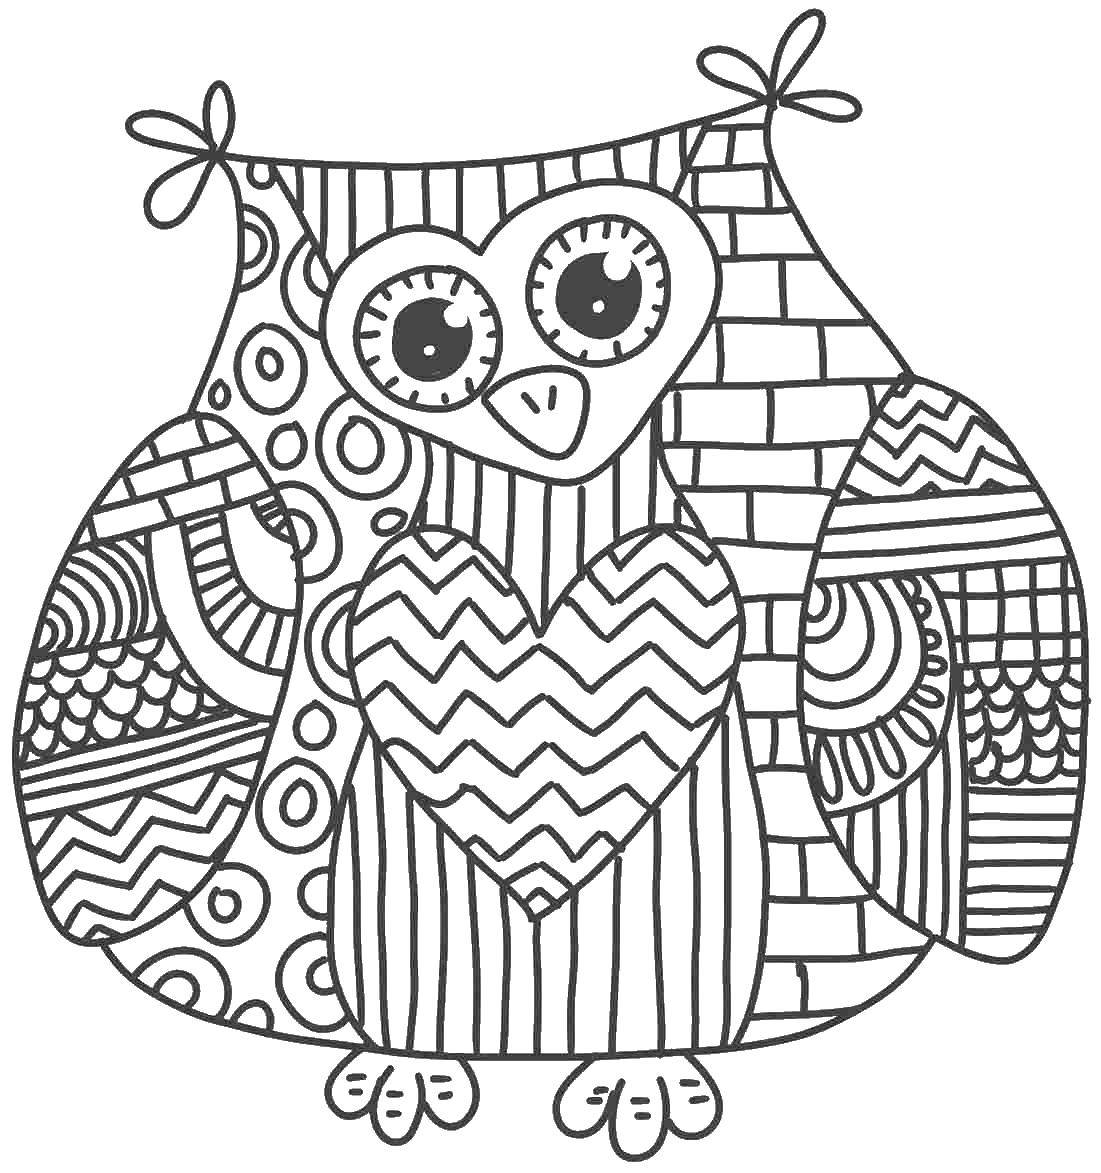 Coloring Owl patterns. Category coloring antistress. Tags:  owl, flowers, patterns.